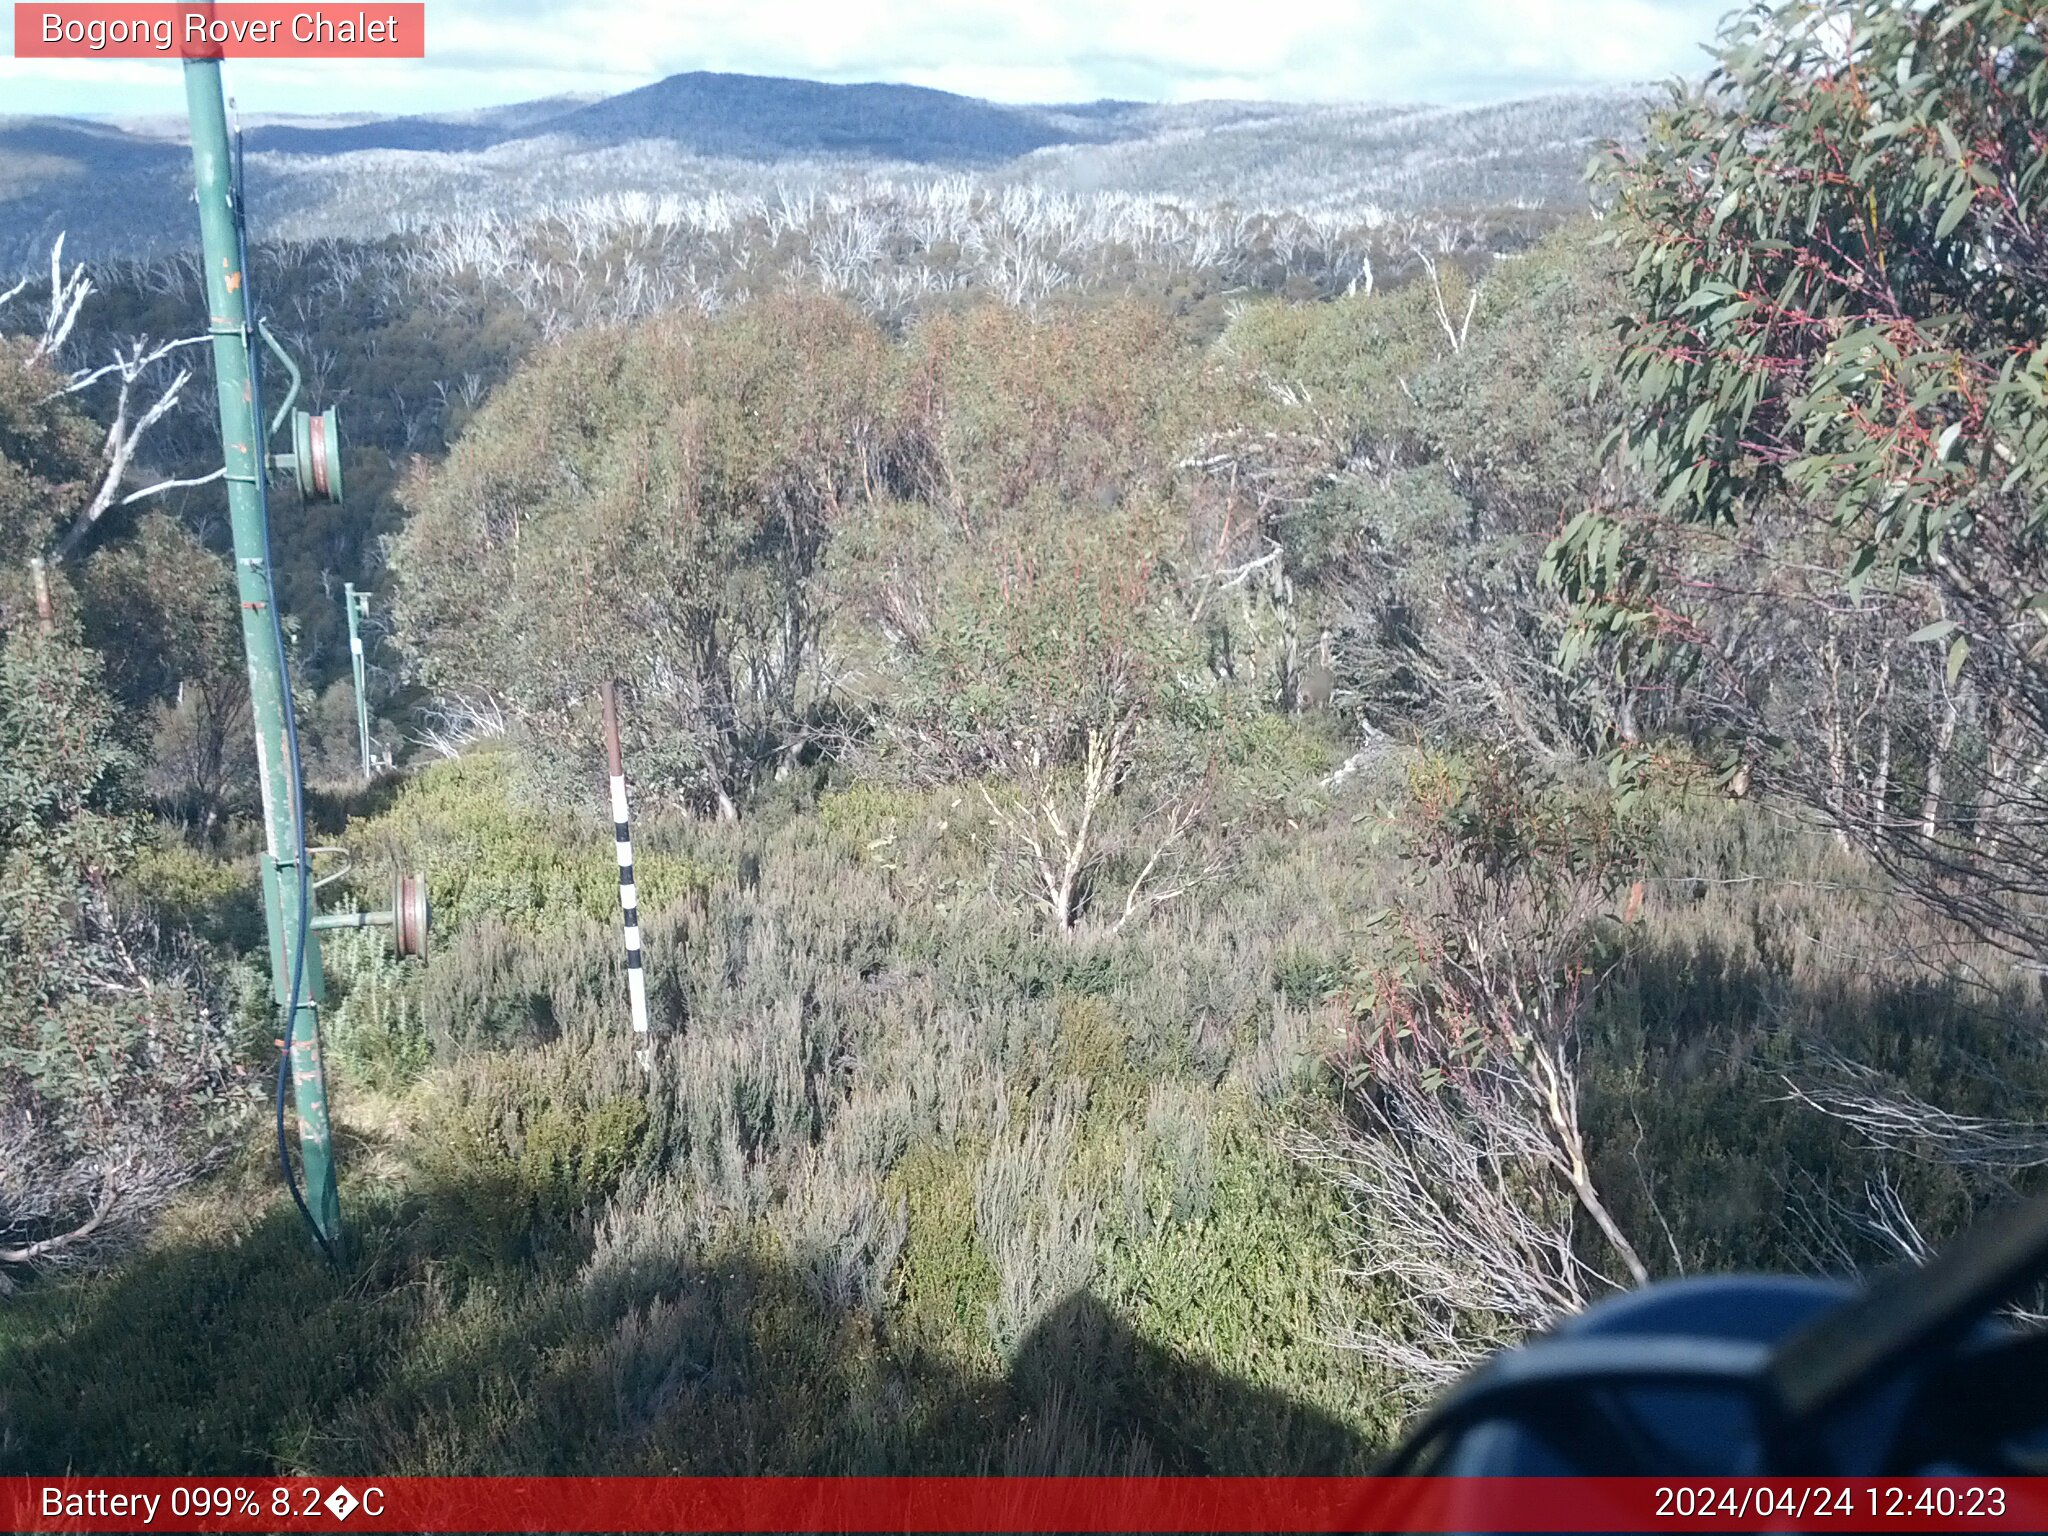 Bogong Web Cam 12:40pm Wednesday 24th of April 2024